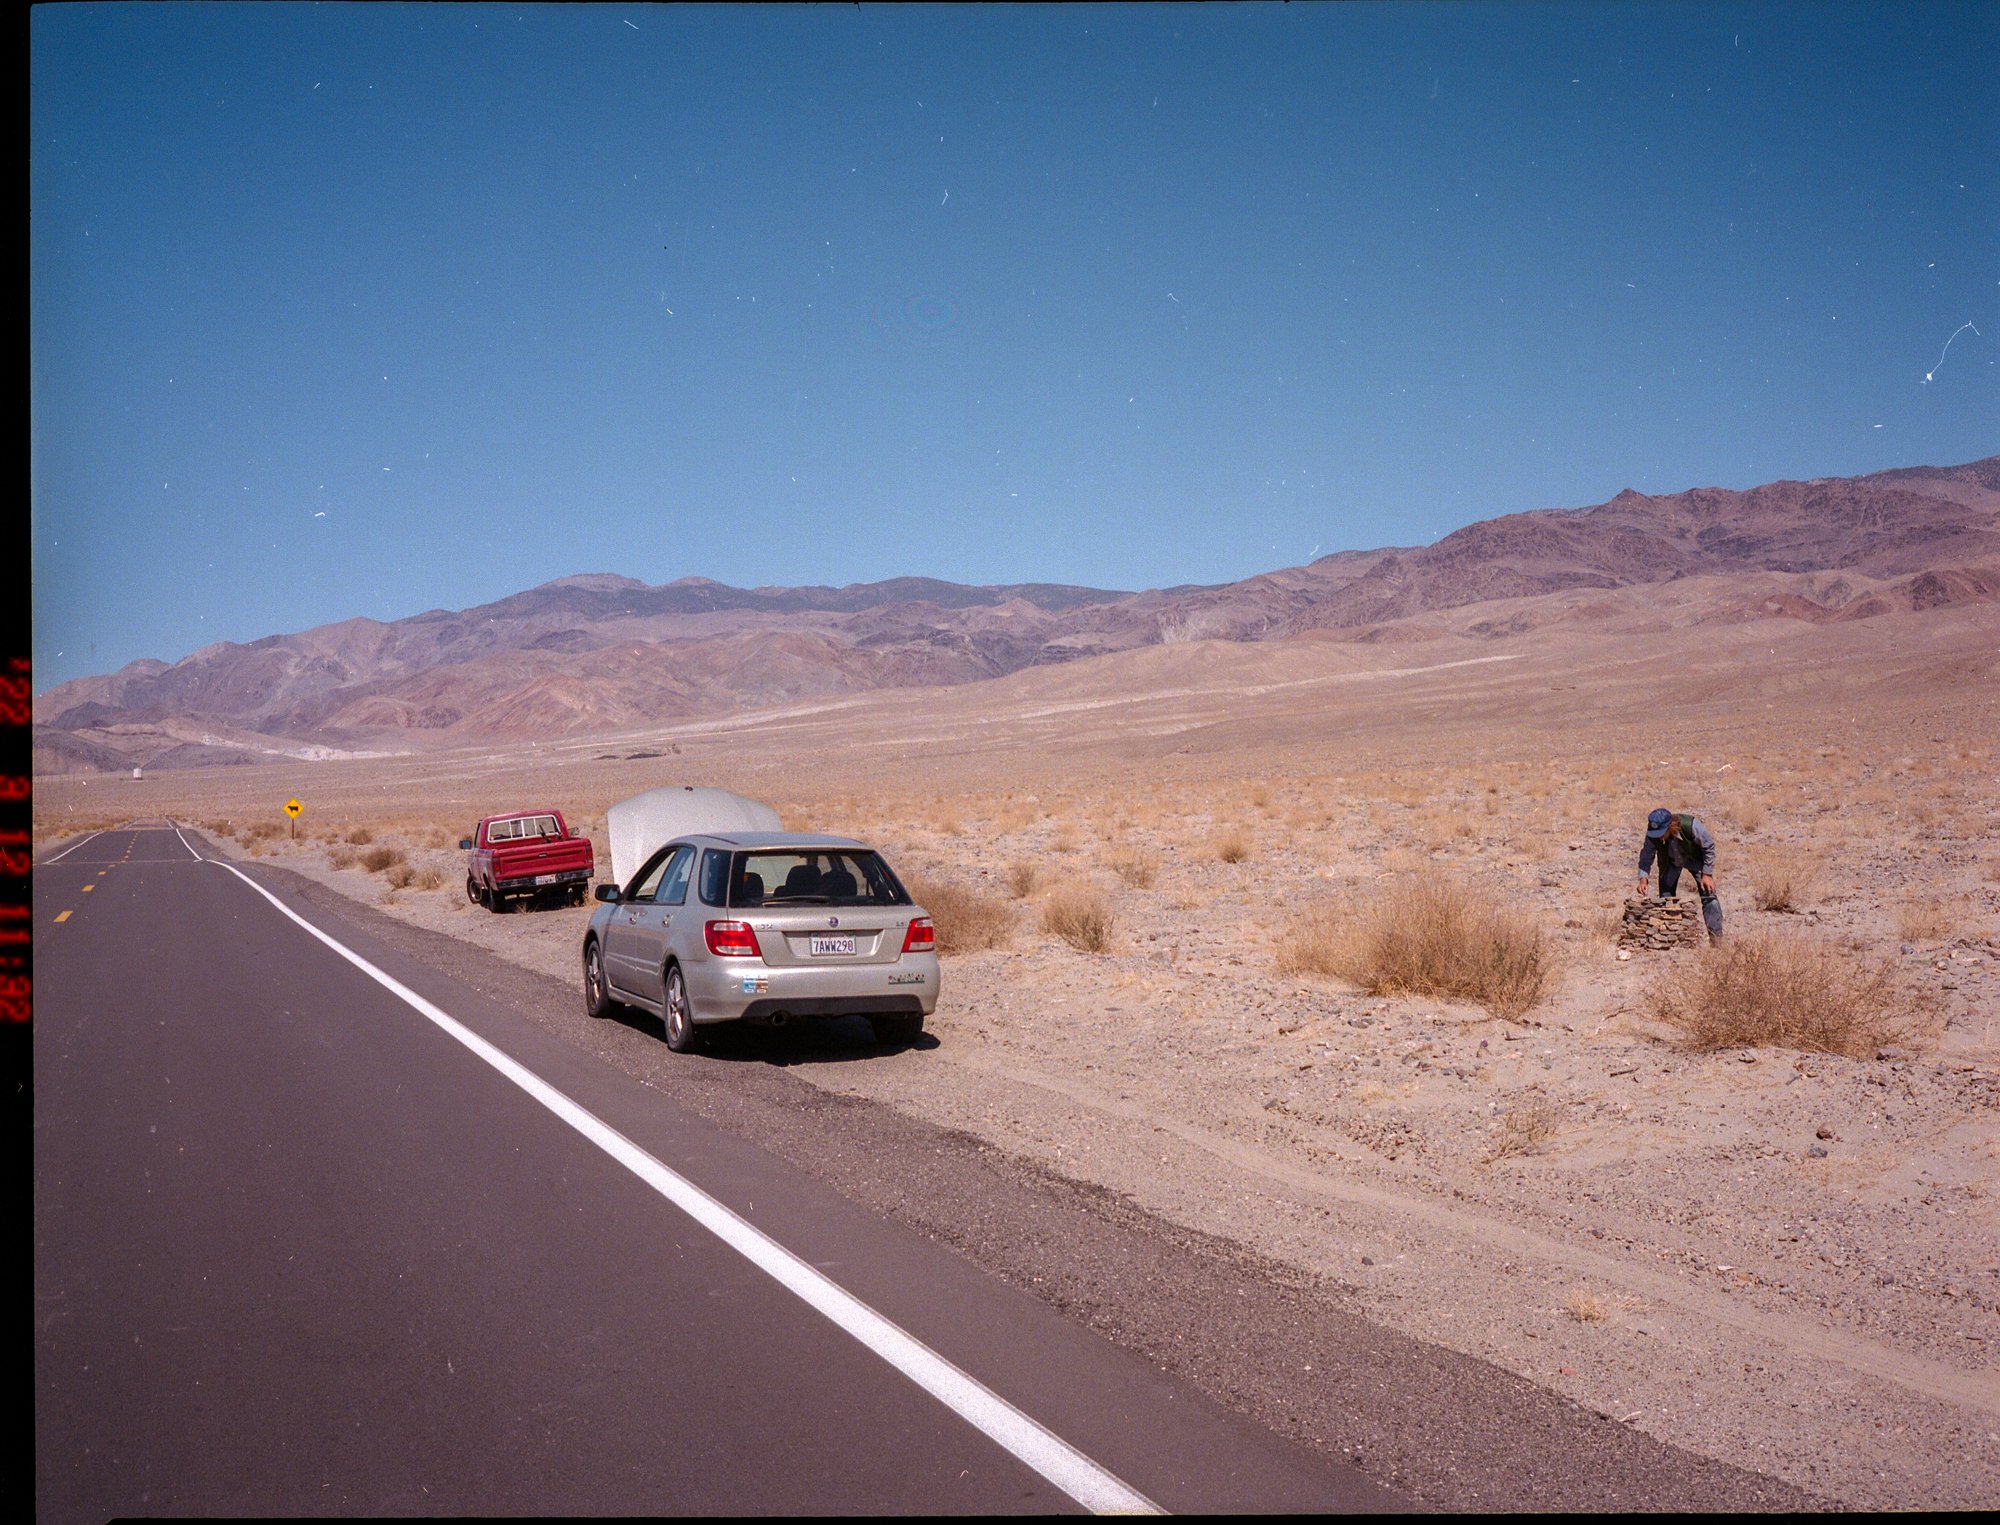  On the drive back from Zabriskie Point, I hit an empty stretch of highway and thought to see how fast my car could go. The RPMs got really high and then I heard this knocking in the engine. The car drove for another 30 or so miles, just enough to ge